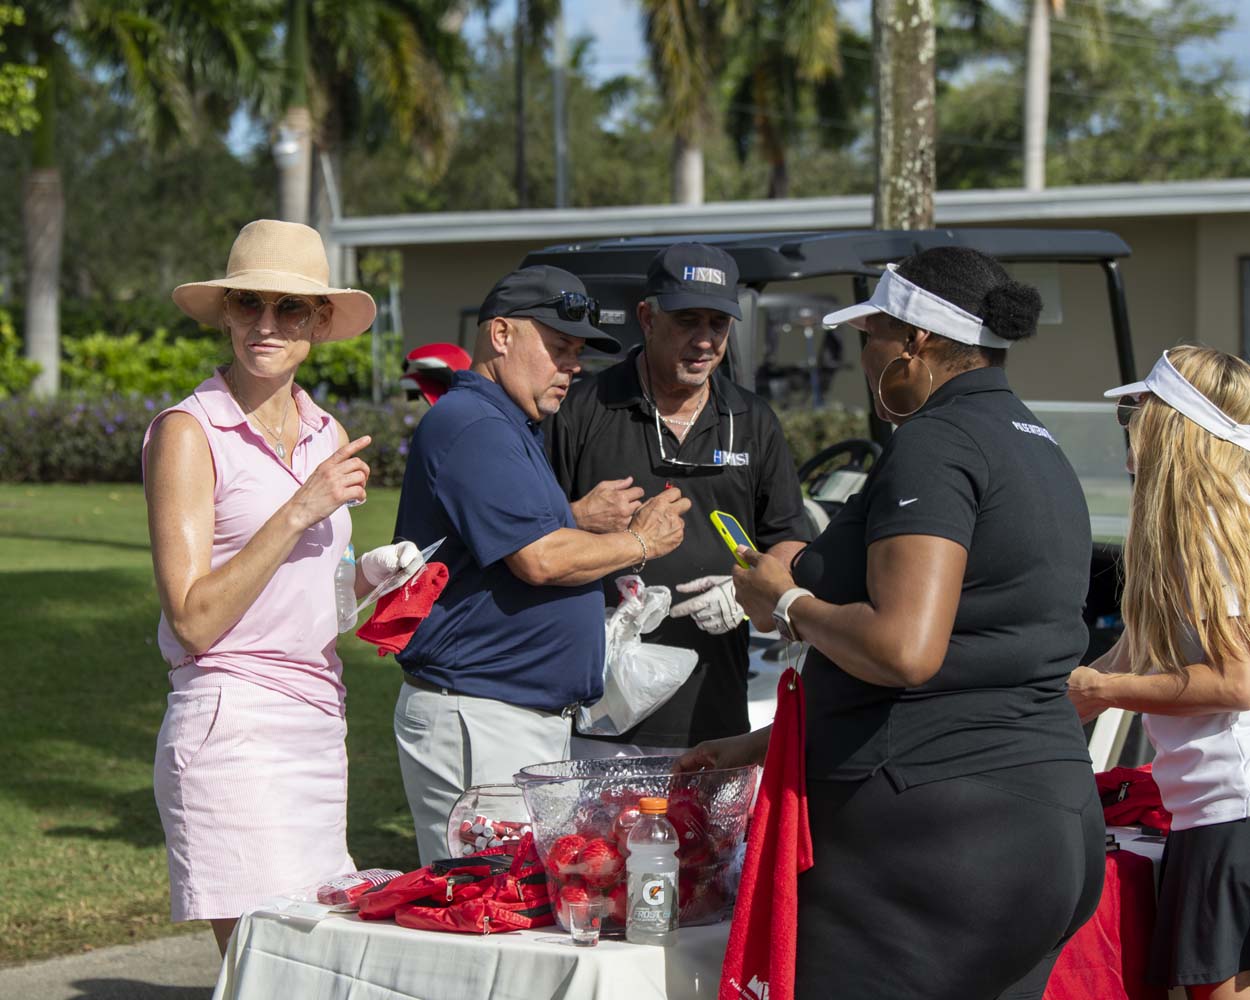 Photos From The Real Deal’s Miami Golf Classic